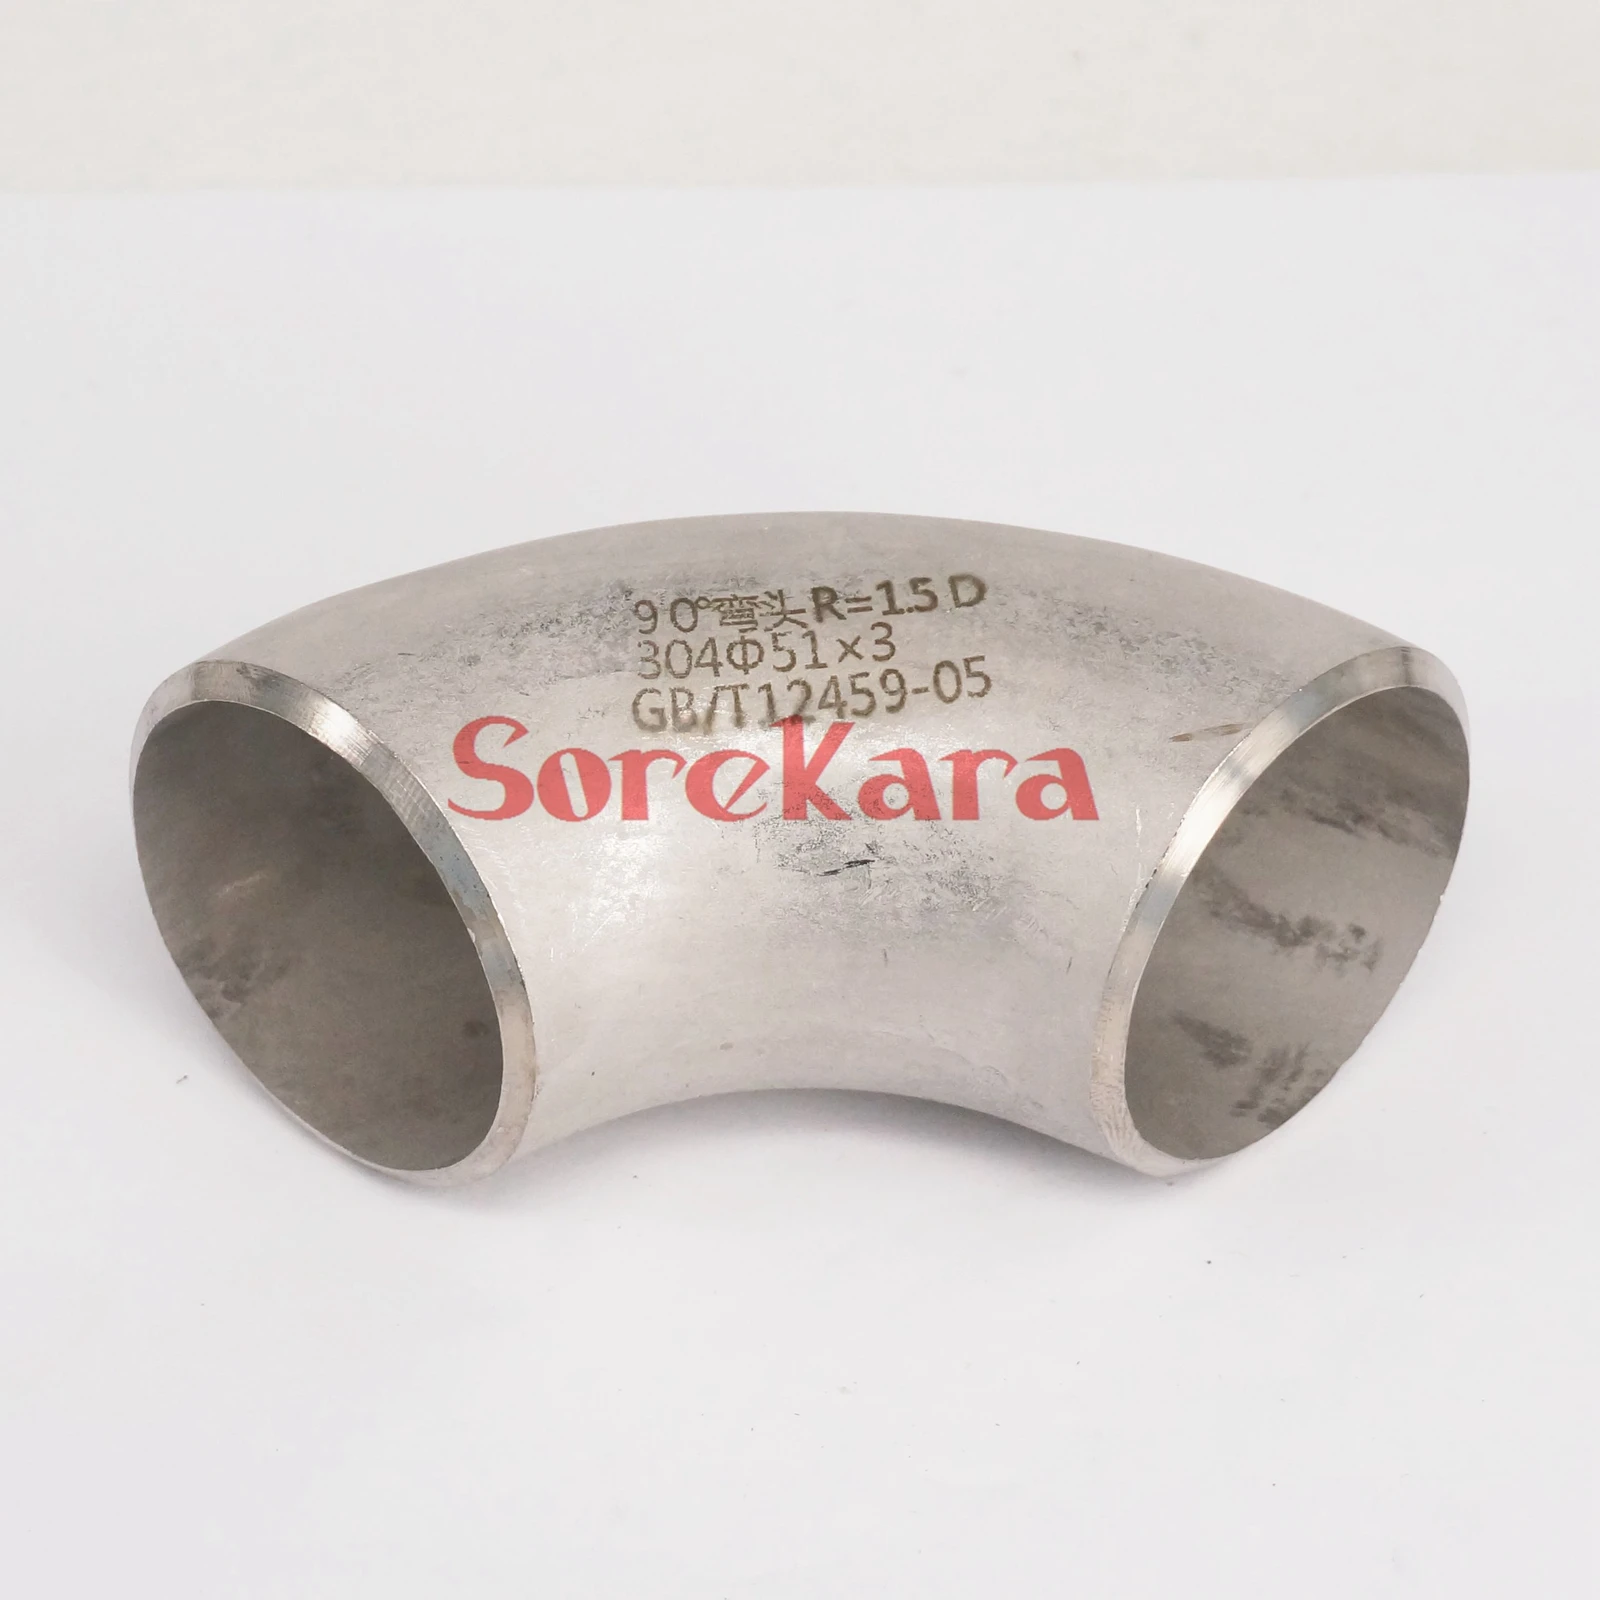 

51x3mm O/DxThickness 304 Stainless Steel 90 Degree Elbow Butt Welded Pipe Fitting Water gas Oil